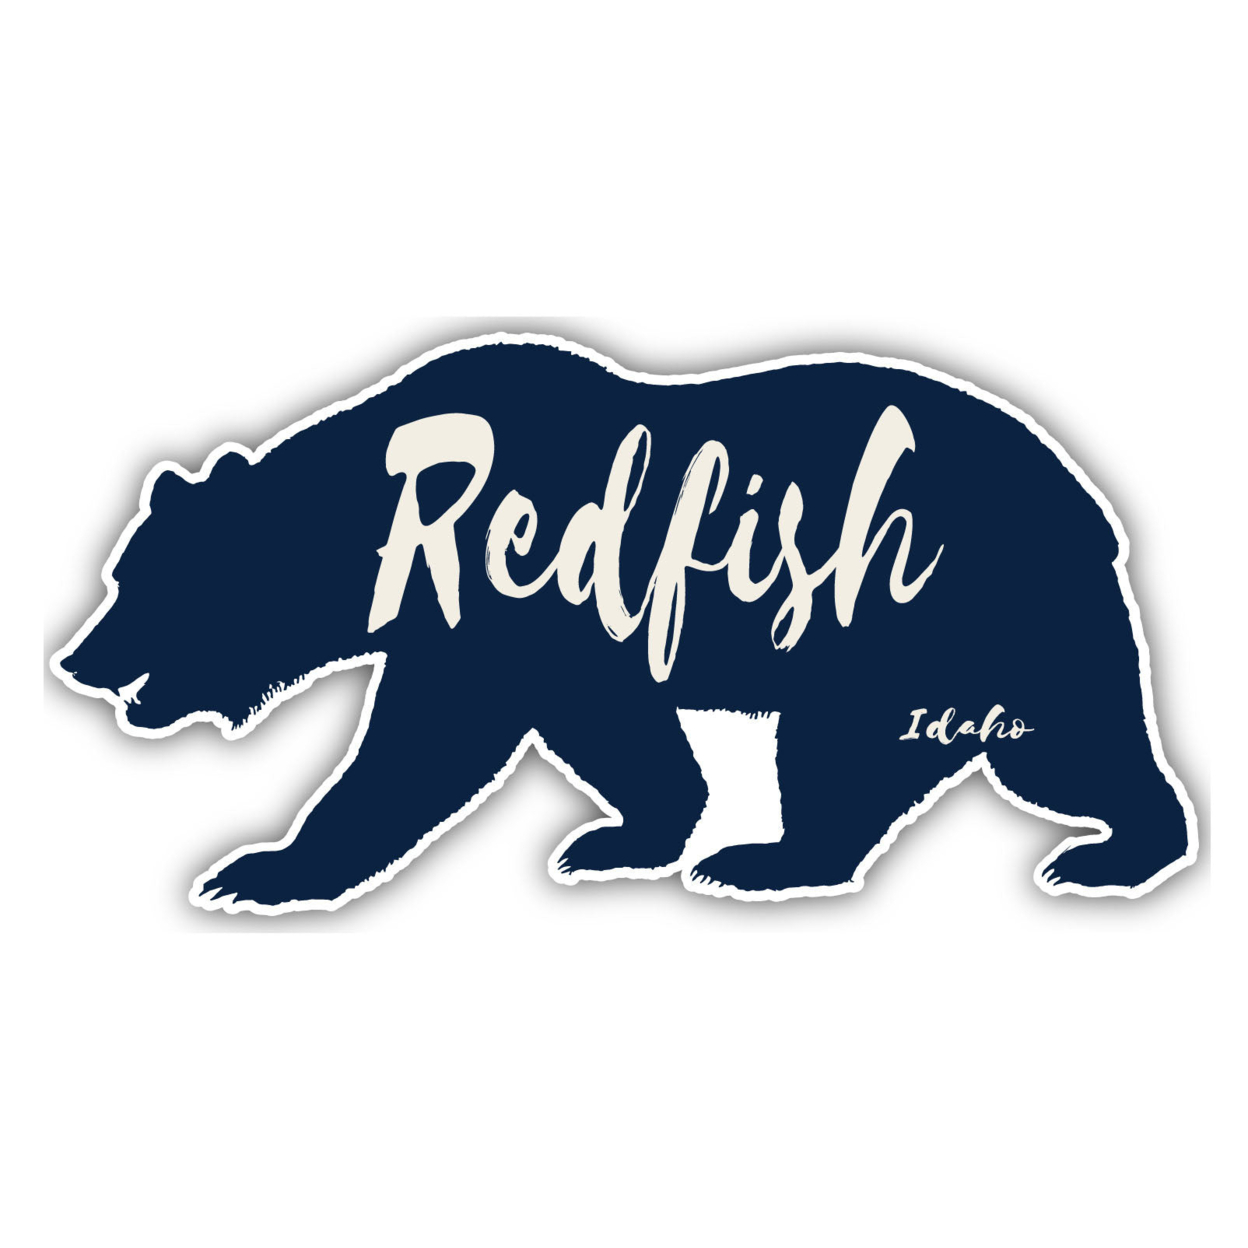 Redfish Idaho Souvenir Decorative Stickers (Choose Theme And Size) - Single Unit, 2-Inch, Great Outdoors